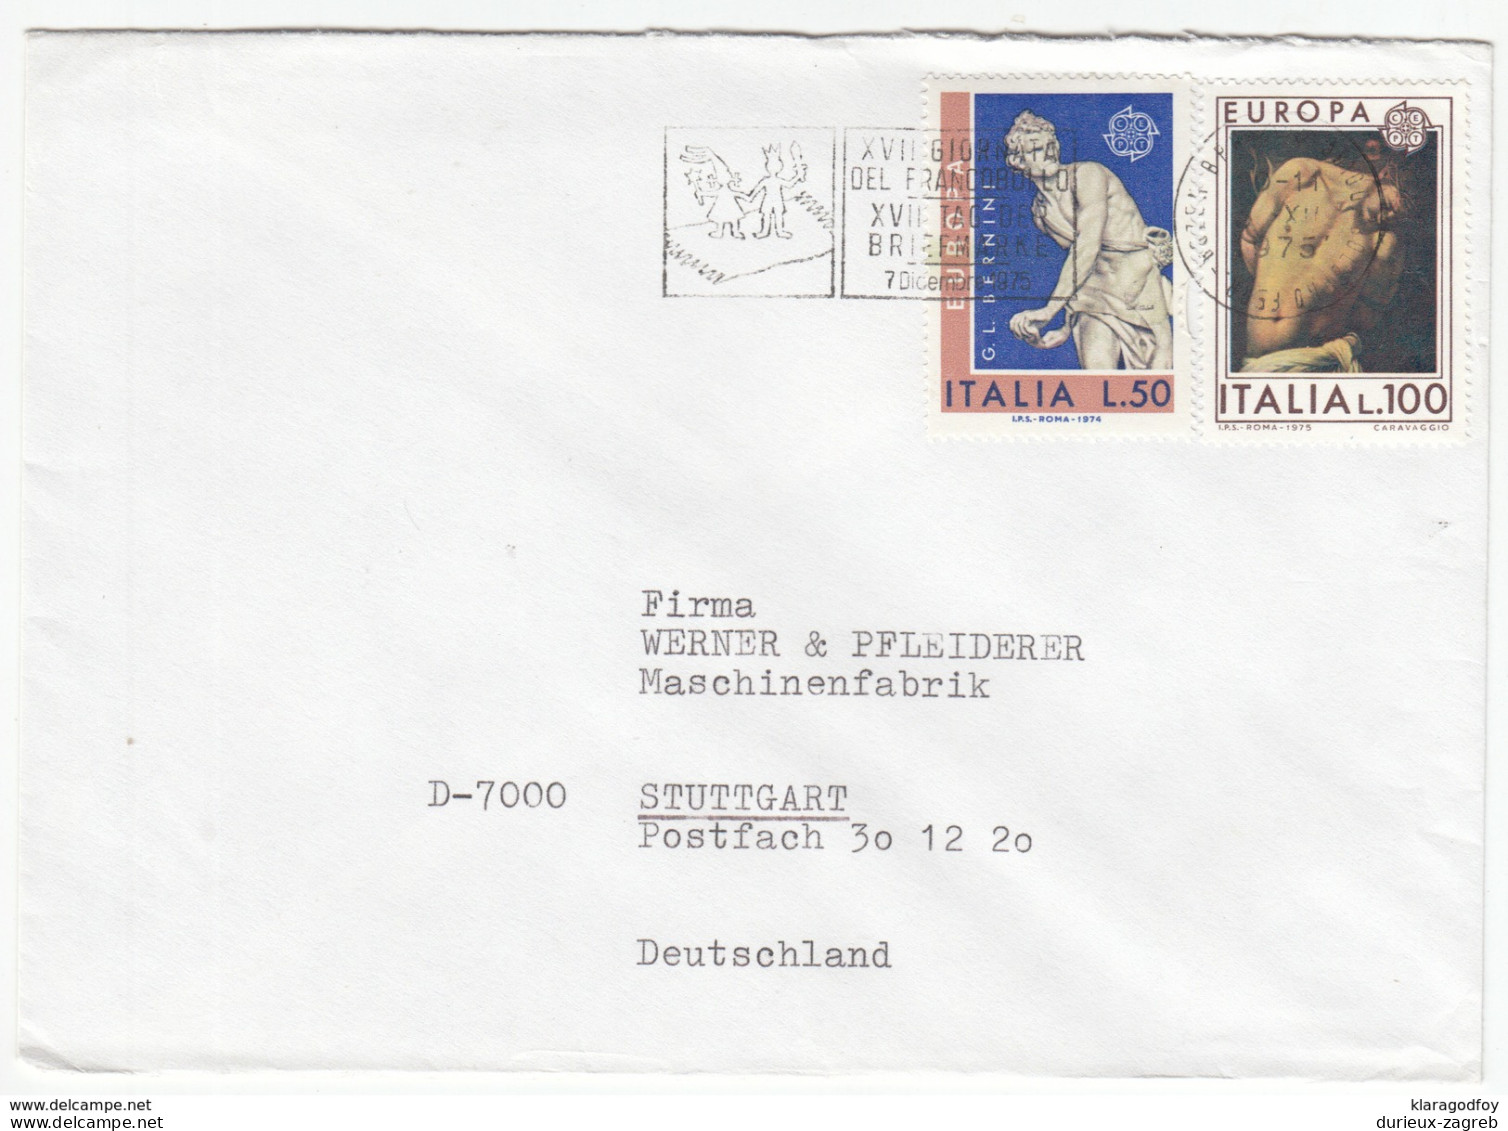 Italy Europa Stamps On Letter Cover Travelled 1975 To Germany - Stamp Day Slogan Postmark B171005 - 1974